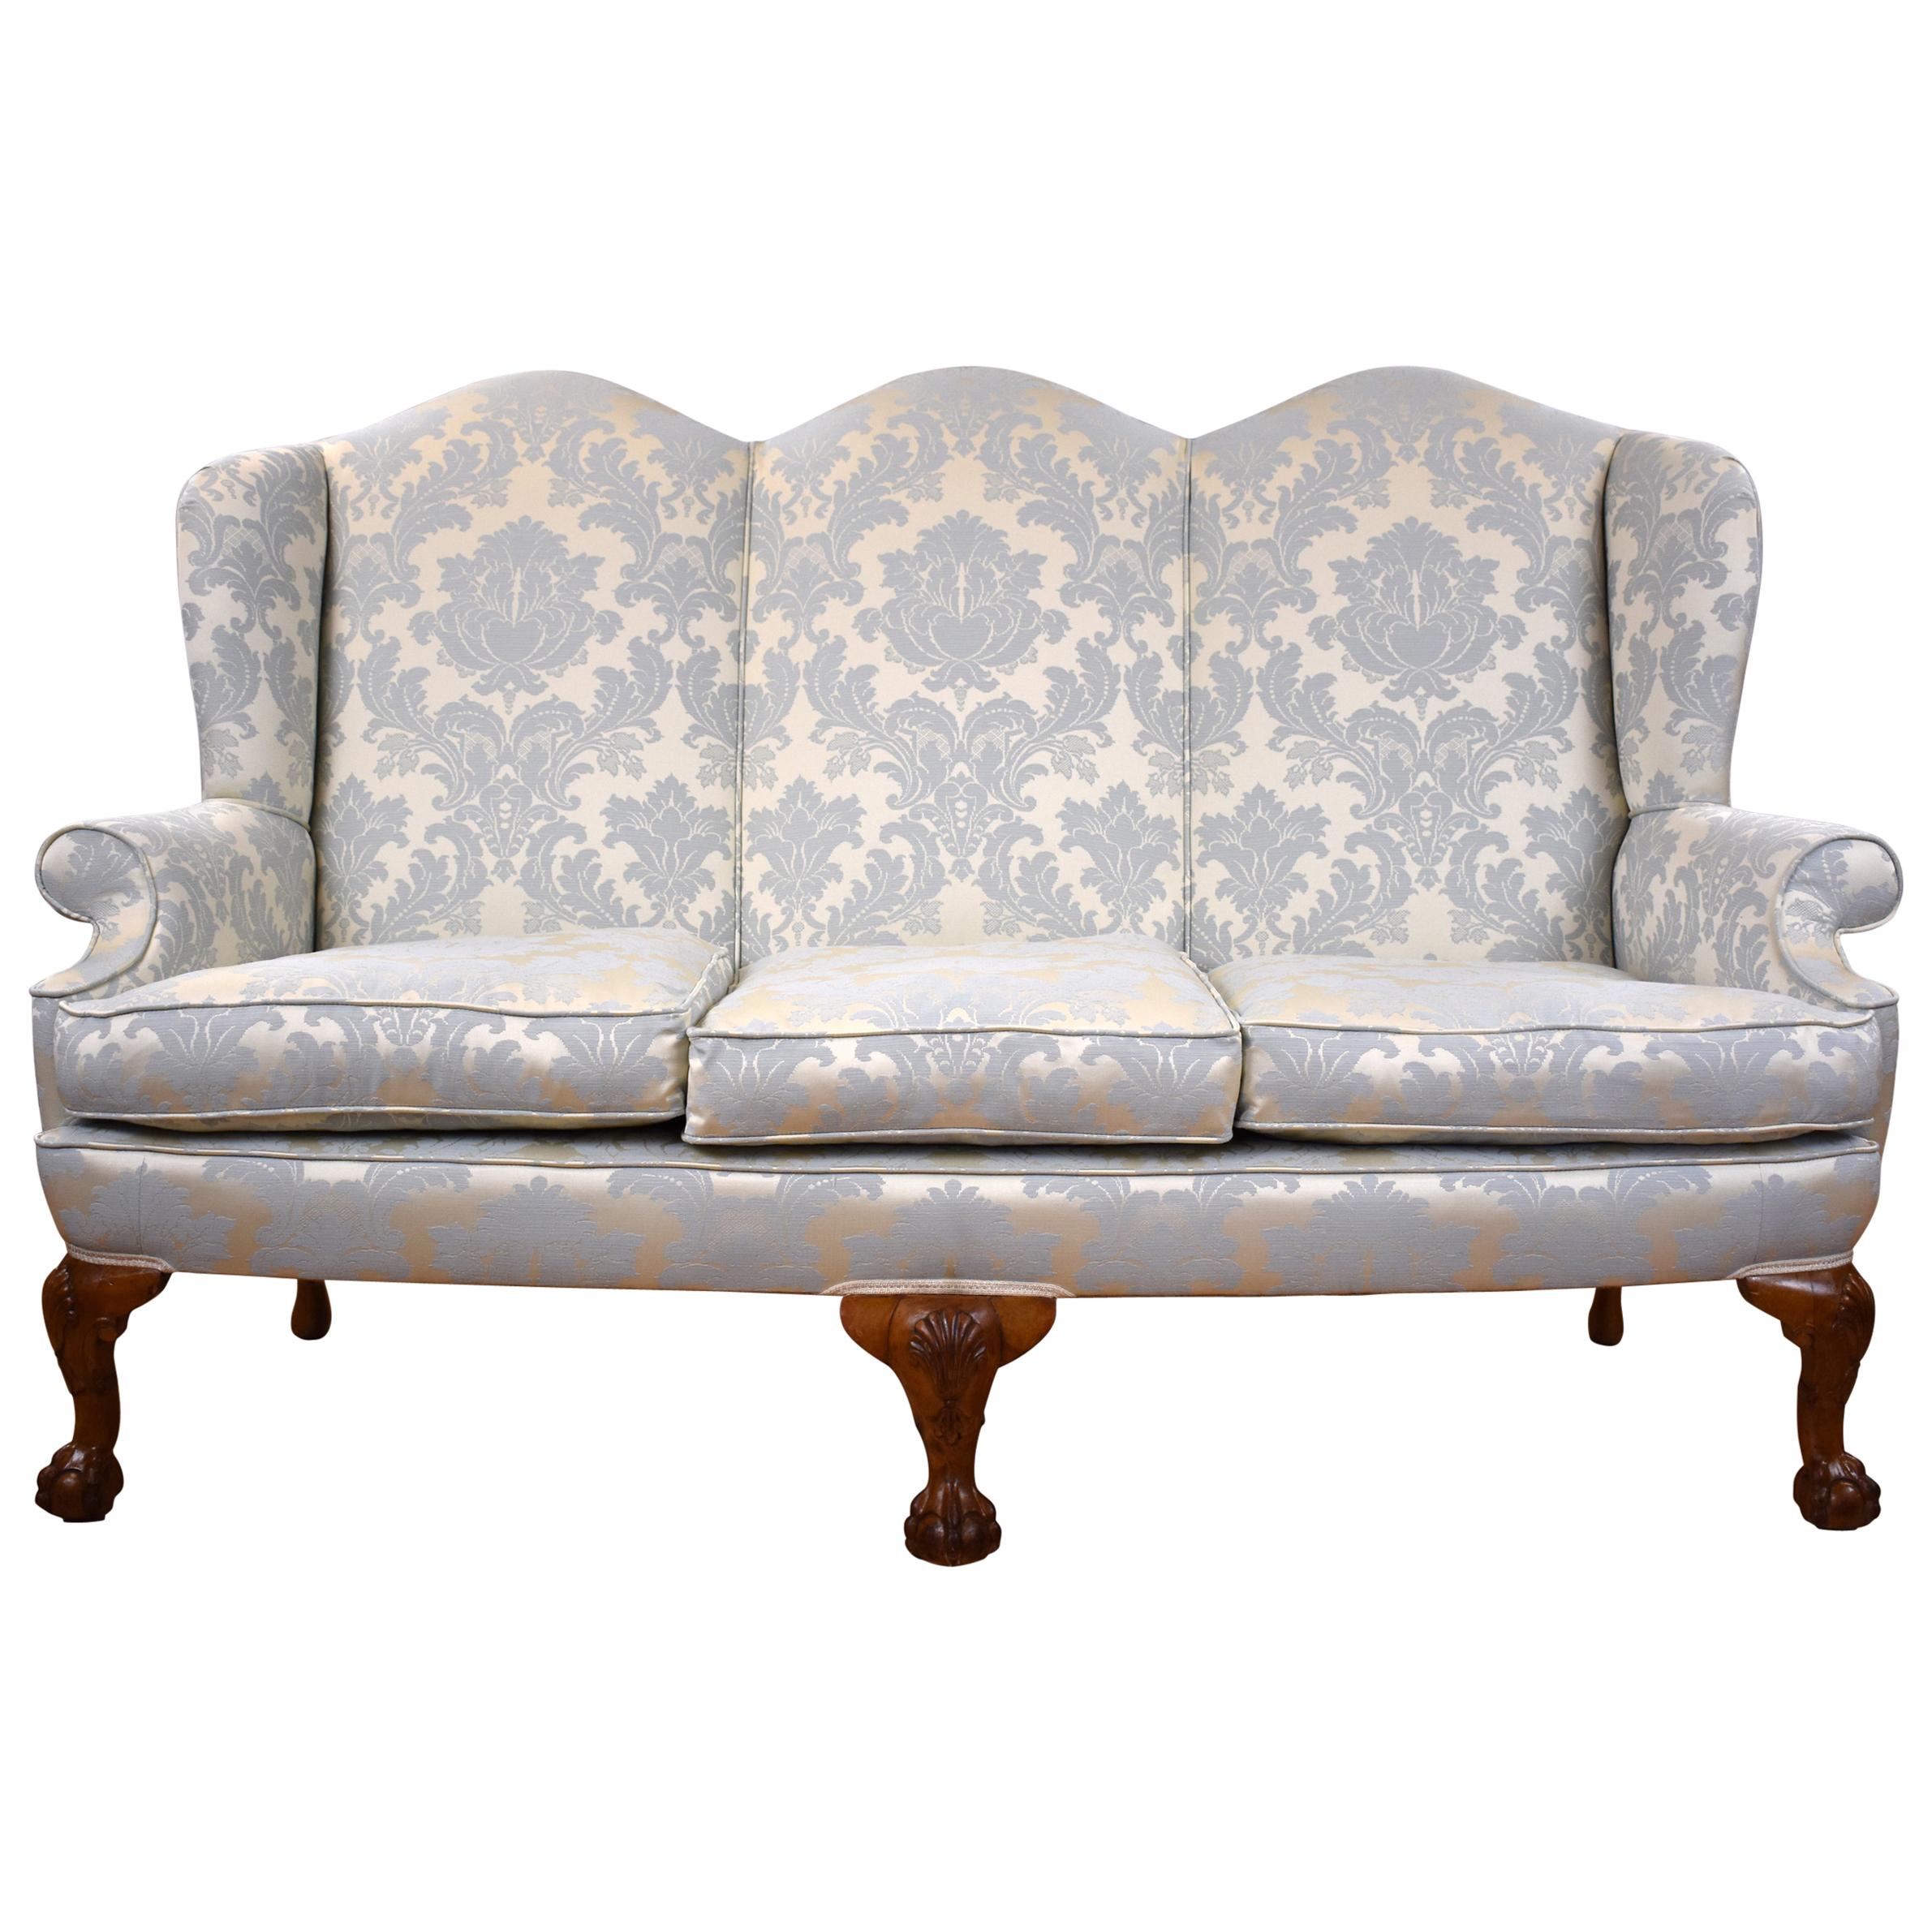 Antique English Queen Anne Style Couch